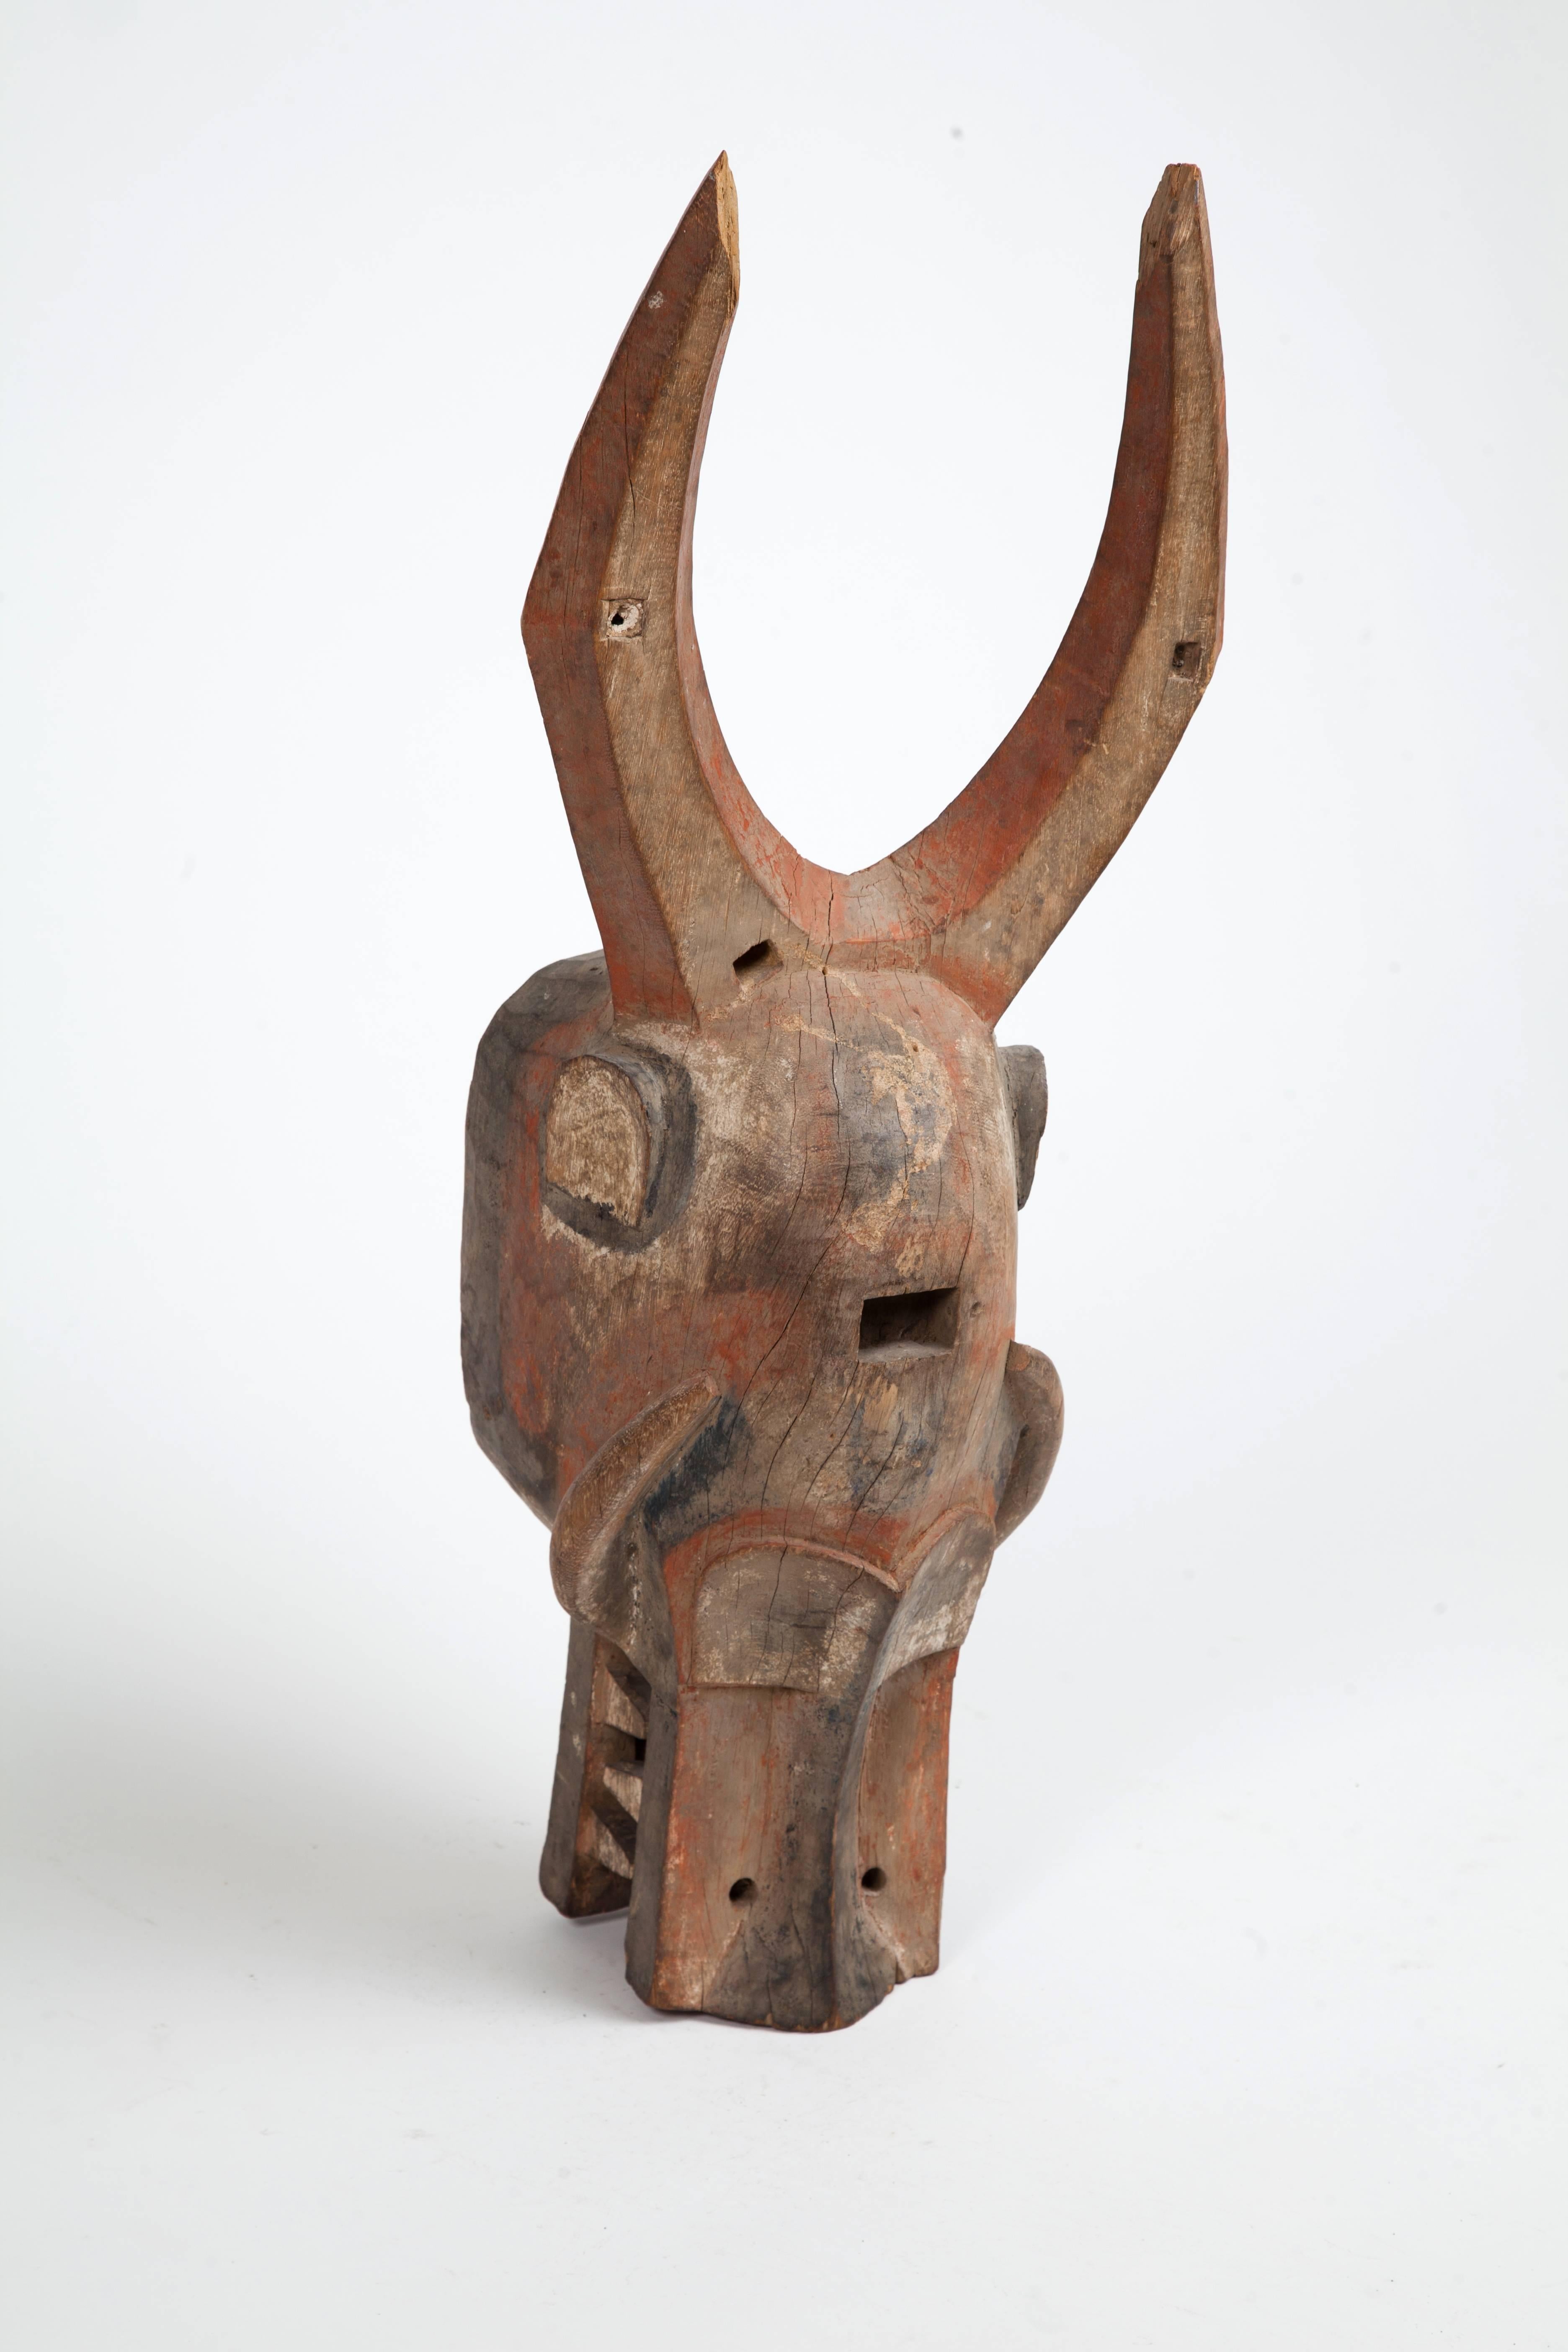 Very fine antique African Senufo cow mask. Ivory Coast, early 20th century. Great color and condition.